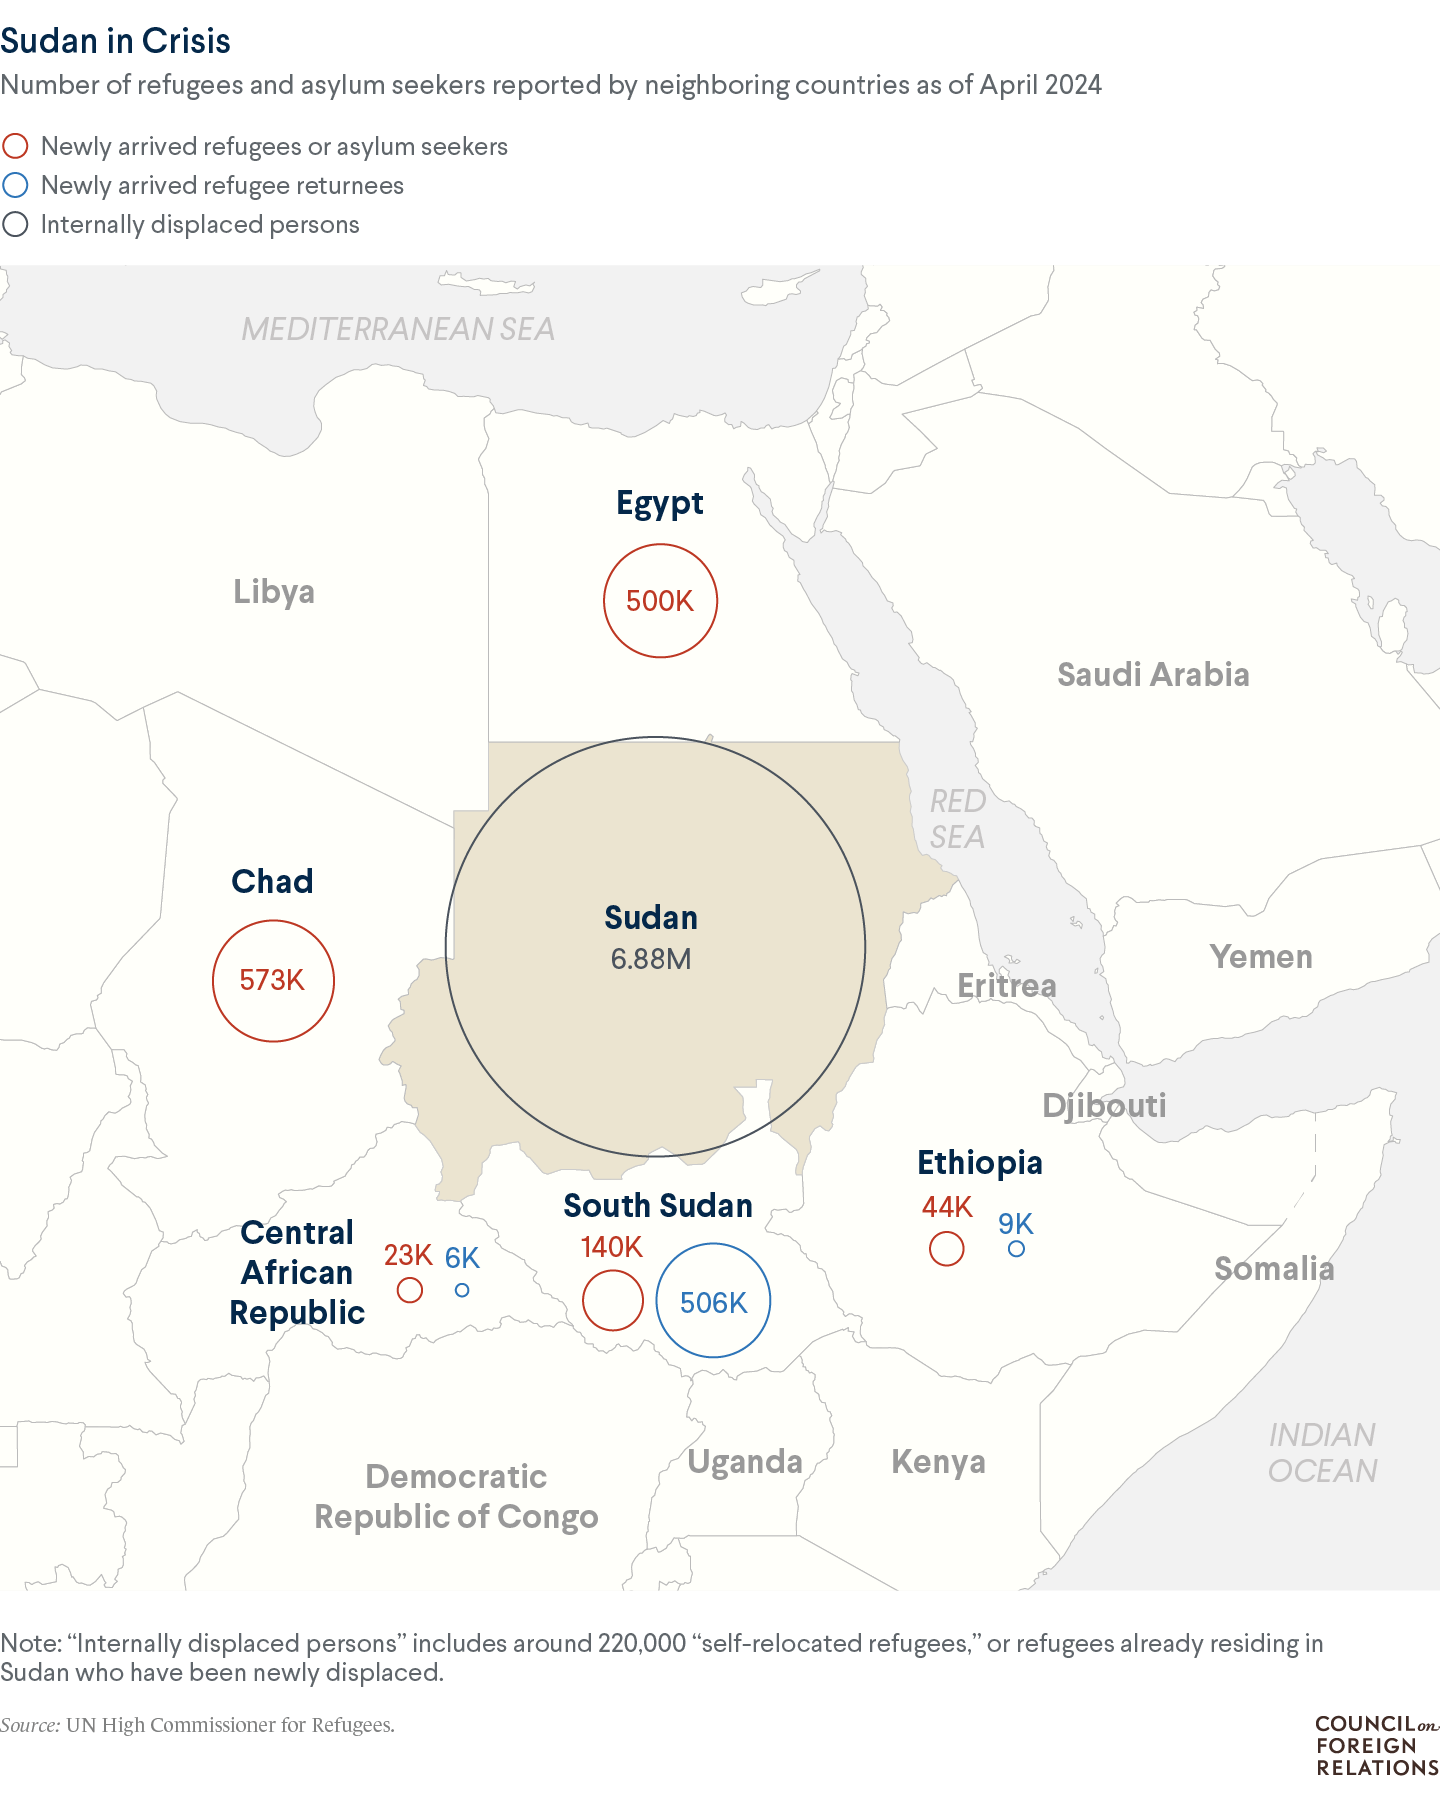 A map showing that there are nearly 7 million internally displaced persons in Sudan